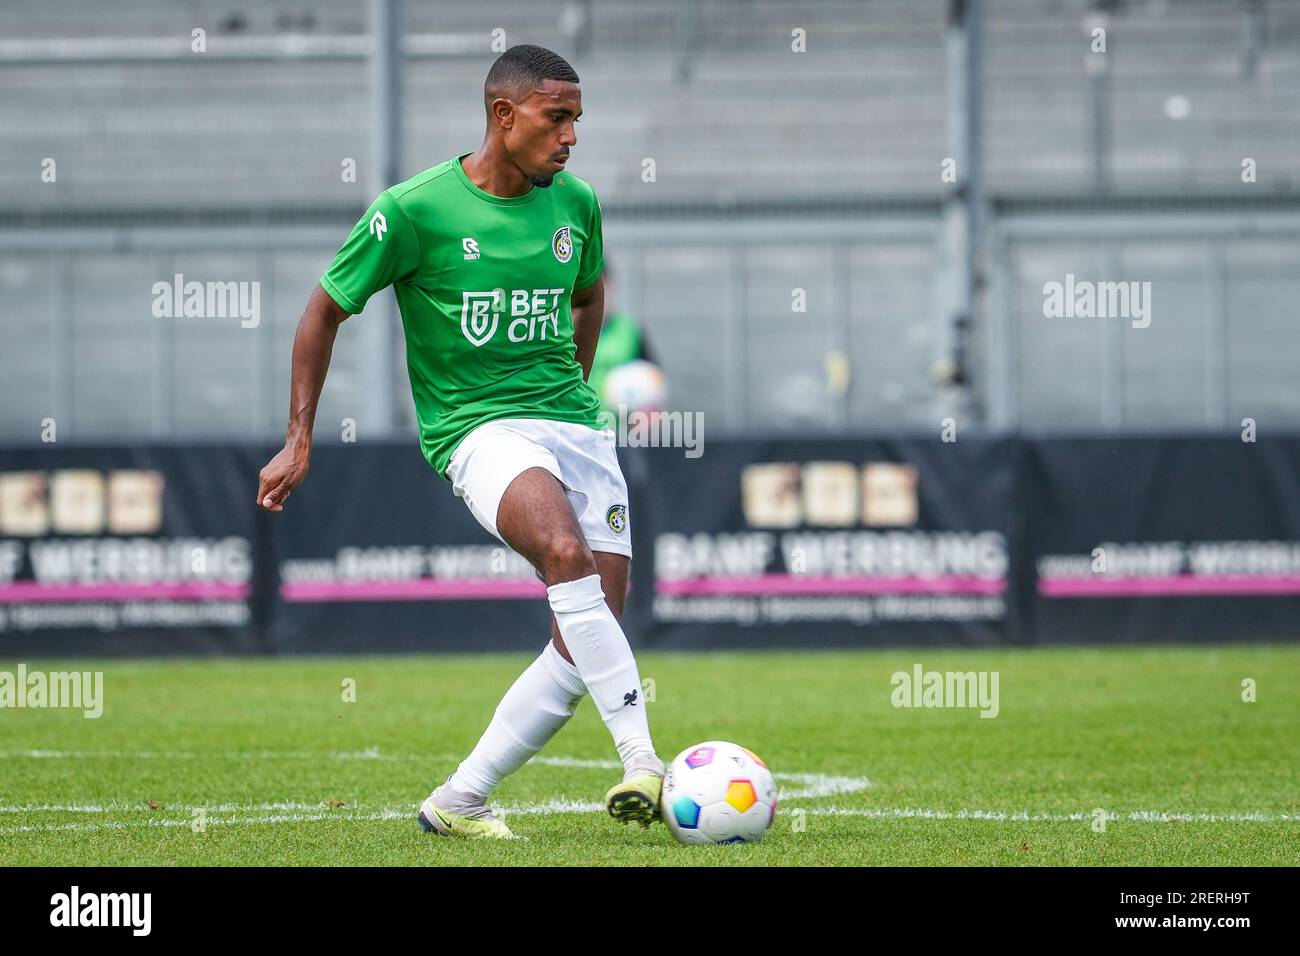 Taunusstein Wehen, Germany. 22nd July, 2023. TAUNUSSTEIN-WEHEN, GERMANY - JULY 22: Deroy Duarte of Fortuna Sittard during the Pre-Season Friendly match between SV Wehen Wiesbaden and Fortuna Sittard at the BRITA-Arena on July 22, 2023 in Taunusstein-Wehen, Germany (Photo by Orange Pictures) Credit: Orange Pics BV/Alamy Live News Stock Photo